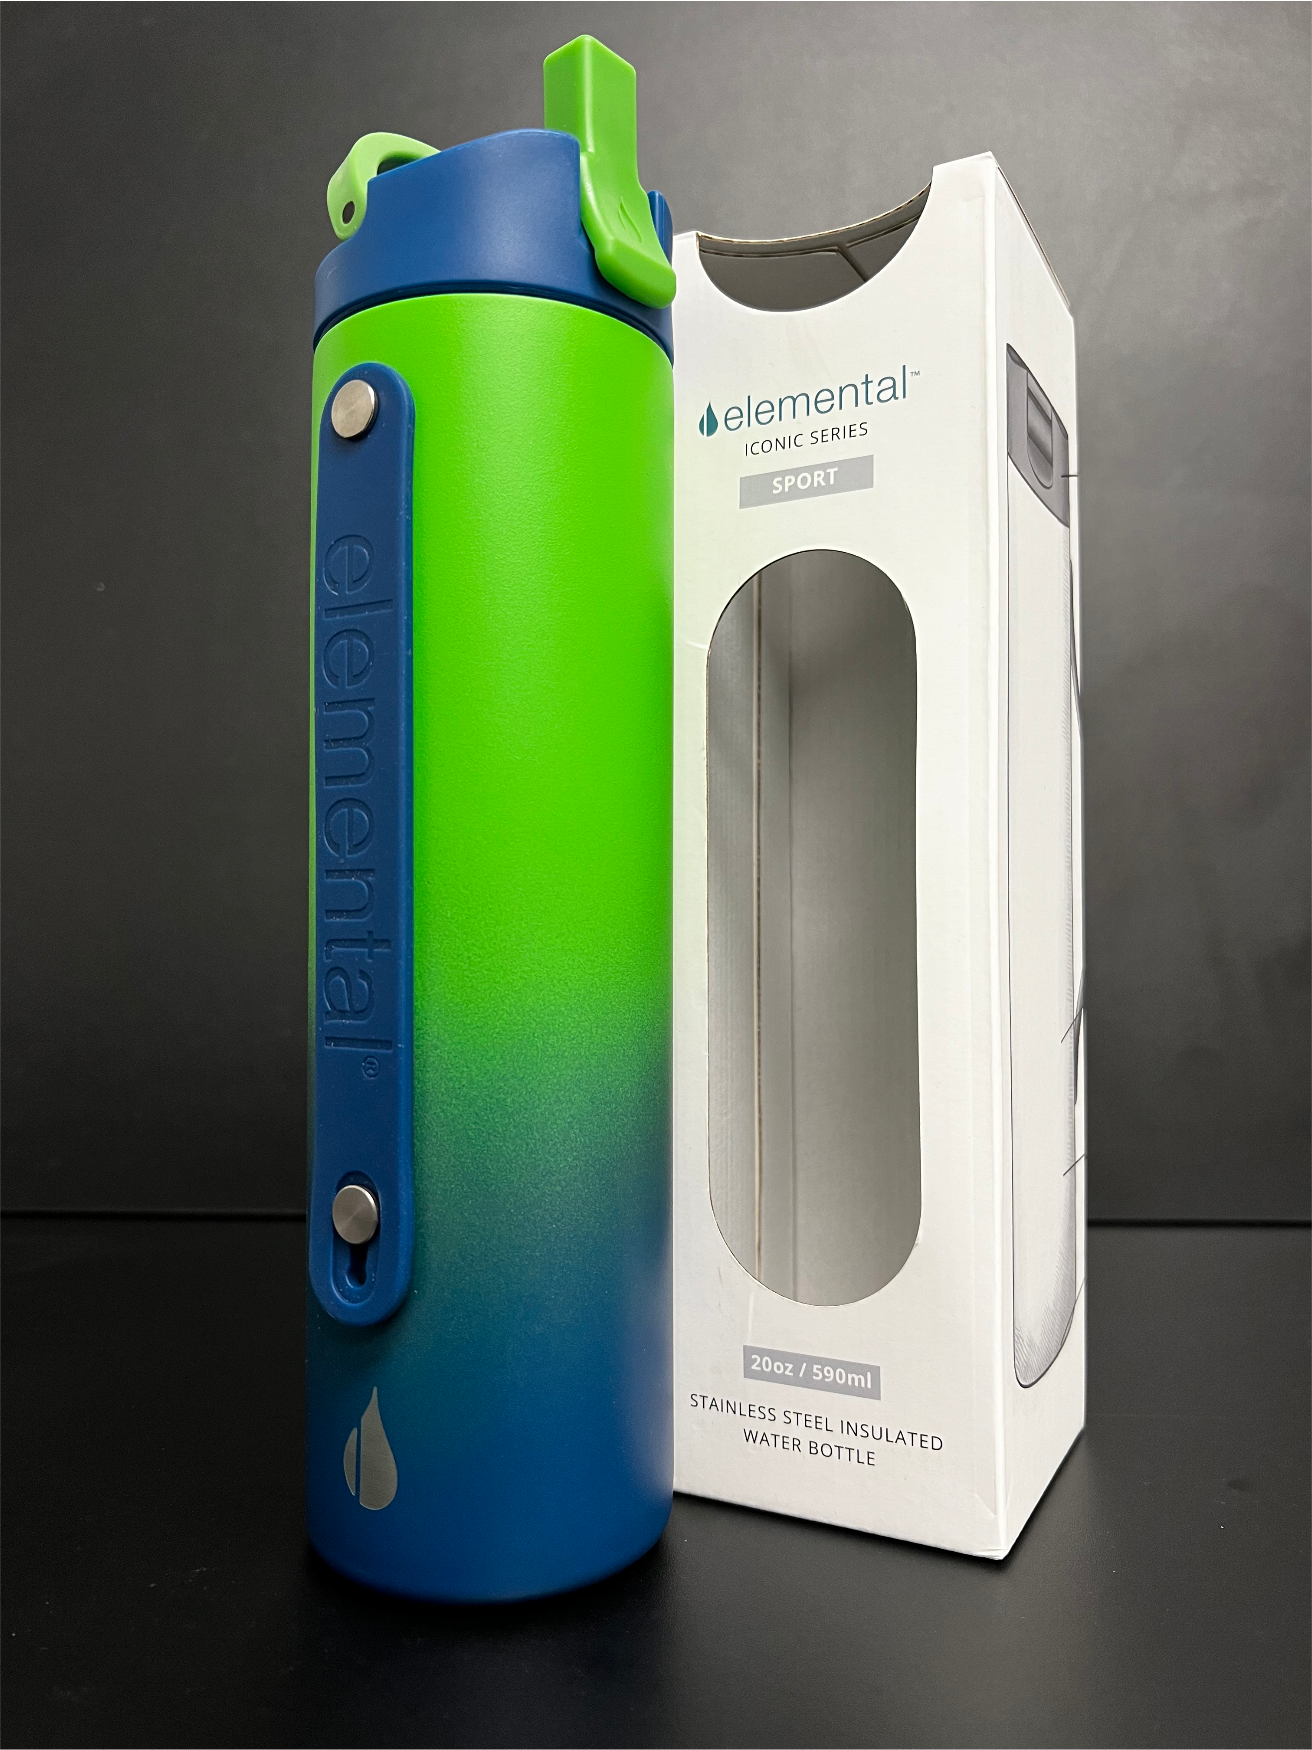 Elemental Sport Iconic Vacuum Insulated Stainless Steel Water